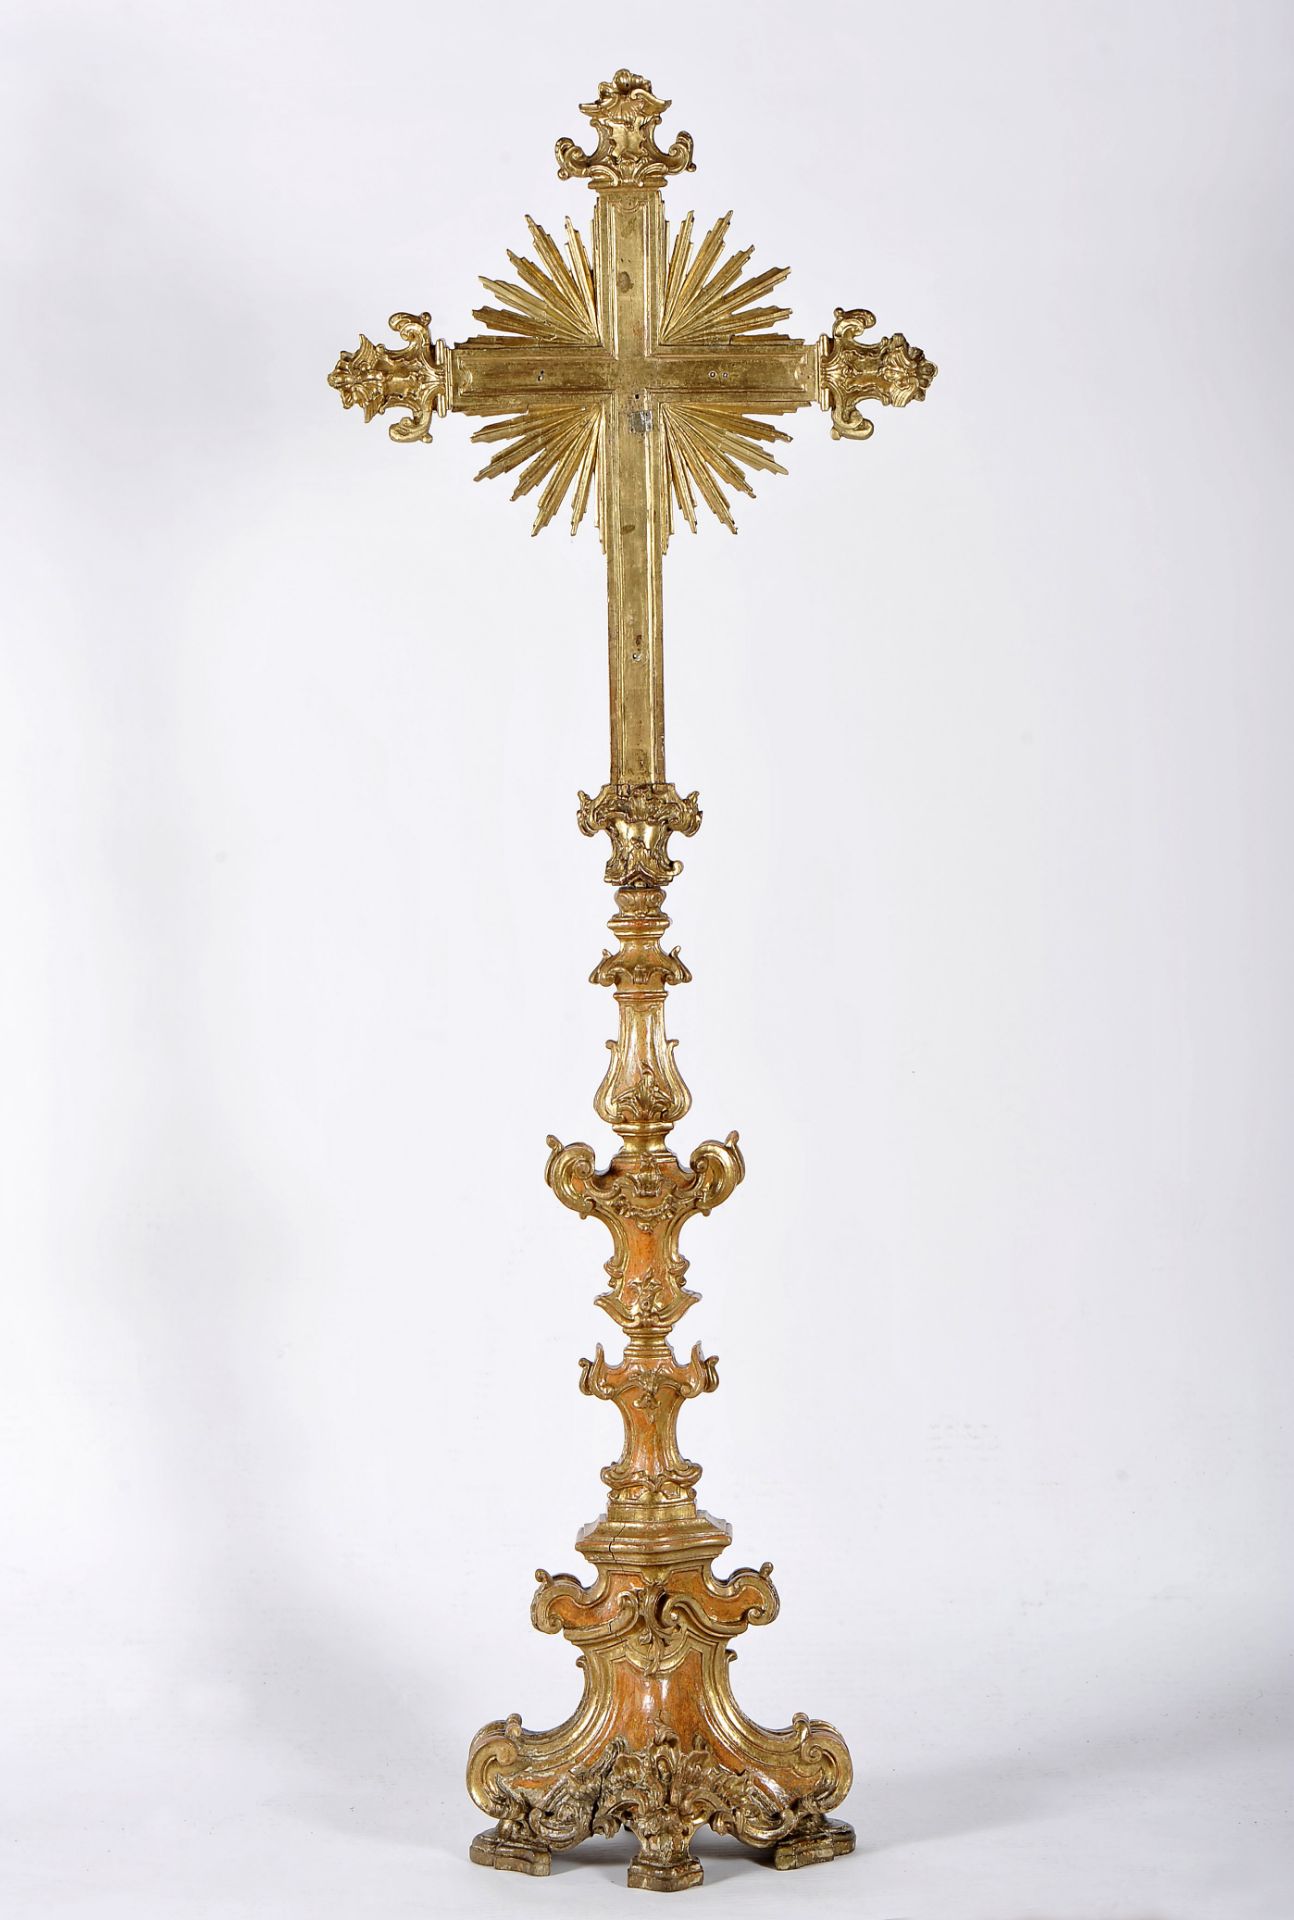 A processional cross in the shape of a torchère